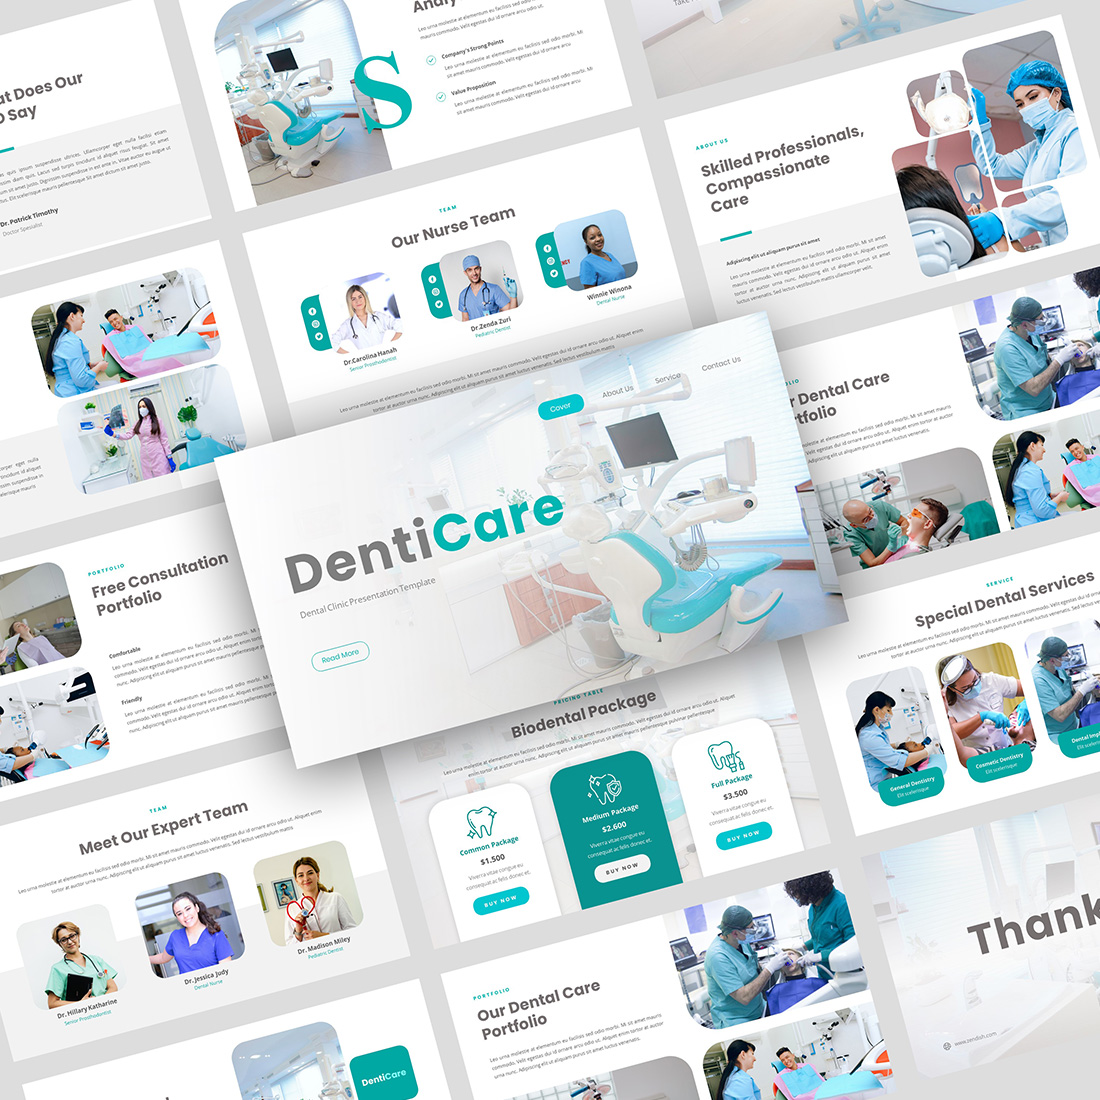 DentiCare-Dental Clinic PowerPoint Template cover image.